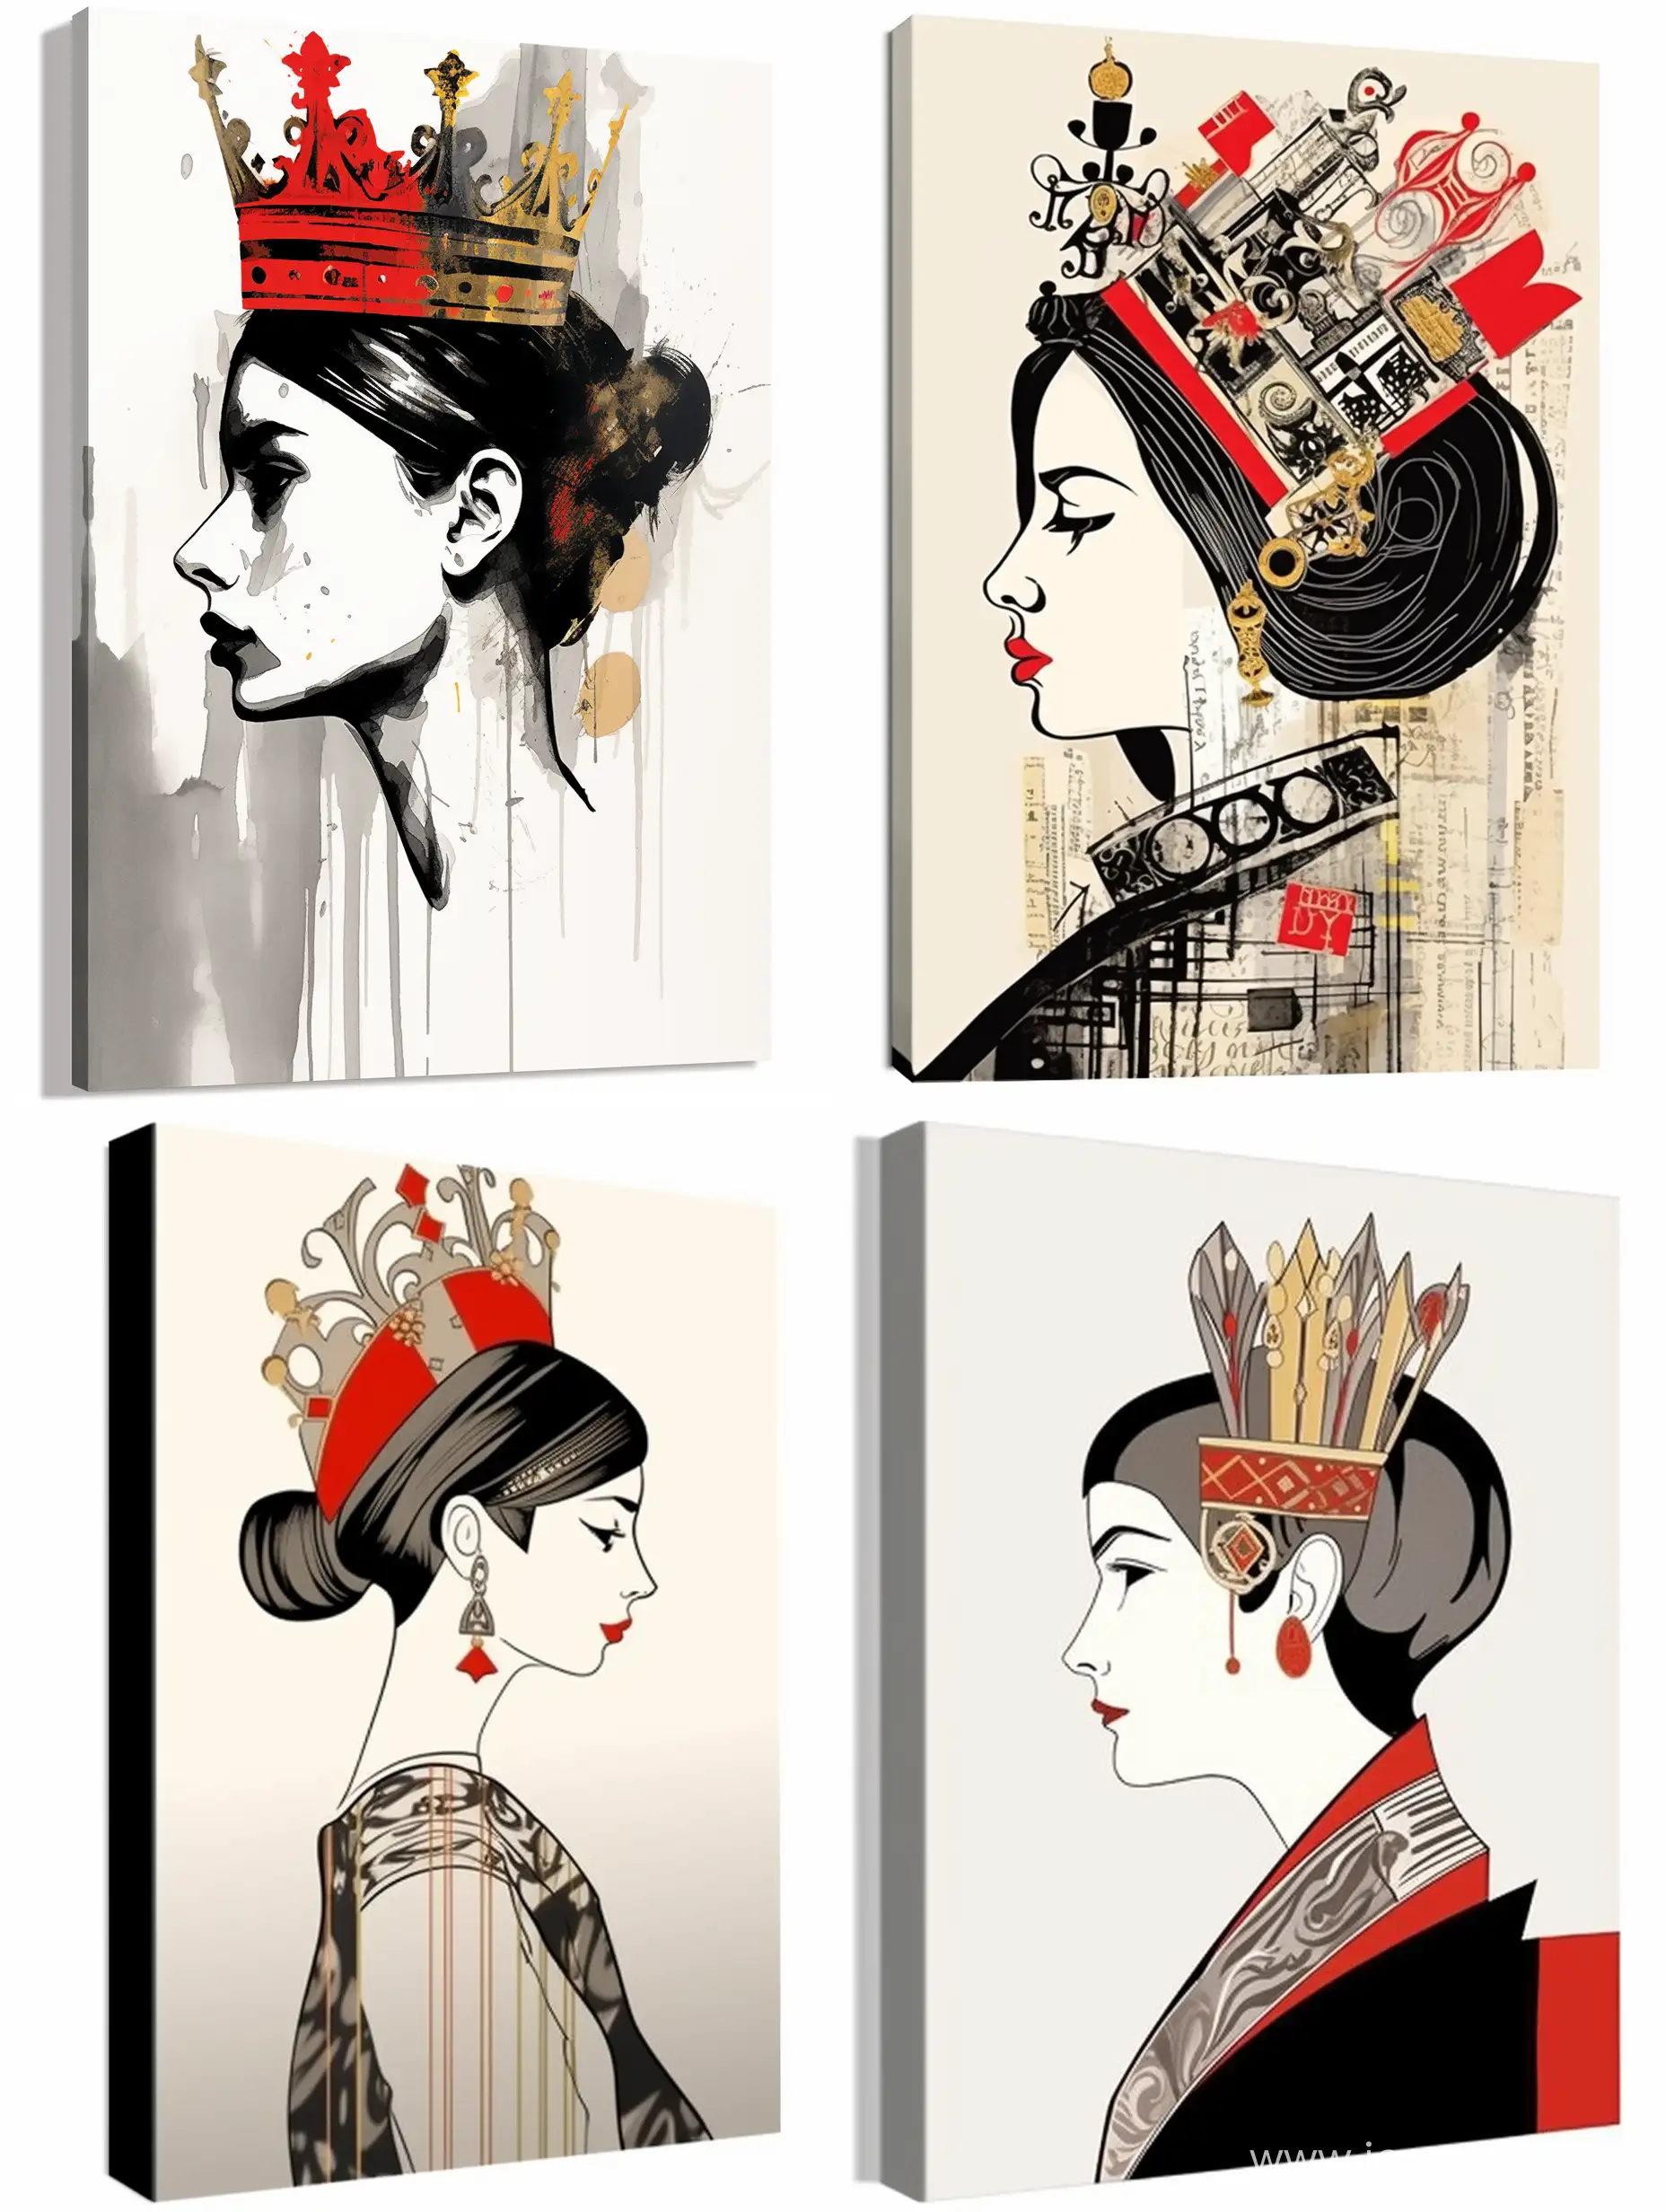 Young Jeanne Lanvin, central portrait in profile, with crown on her head, wearing Lanvin clothing, on white background, colors: gray, black, red, gold, René Grouot style, decorative, illustration, ink stroke, cartoon style